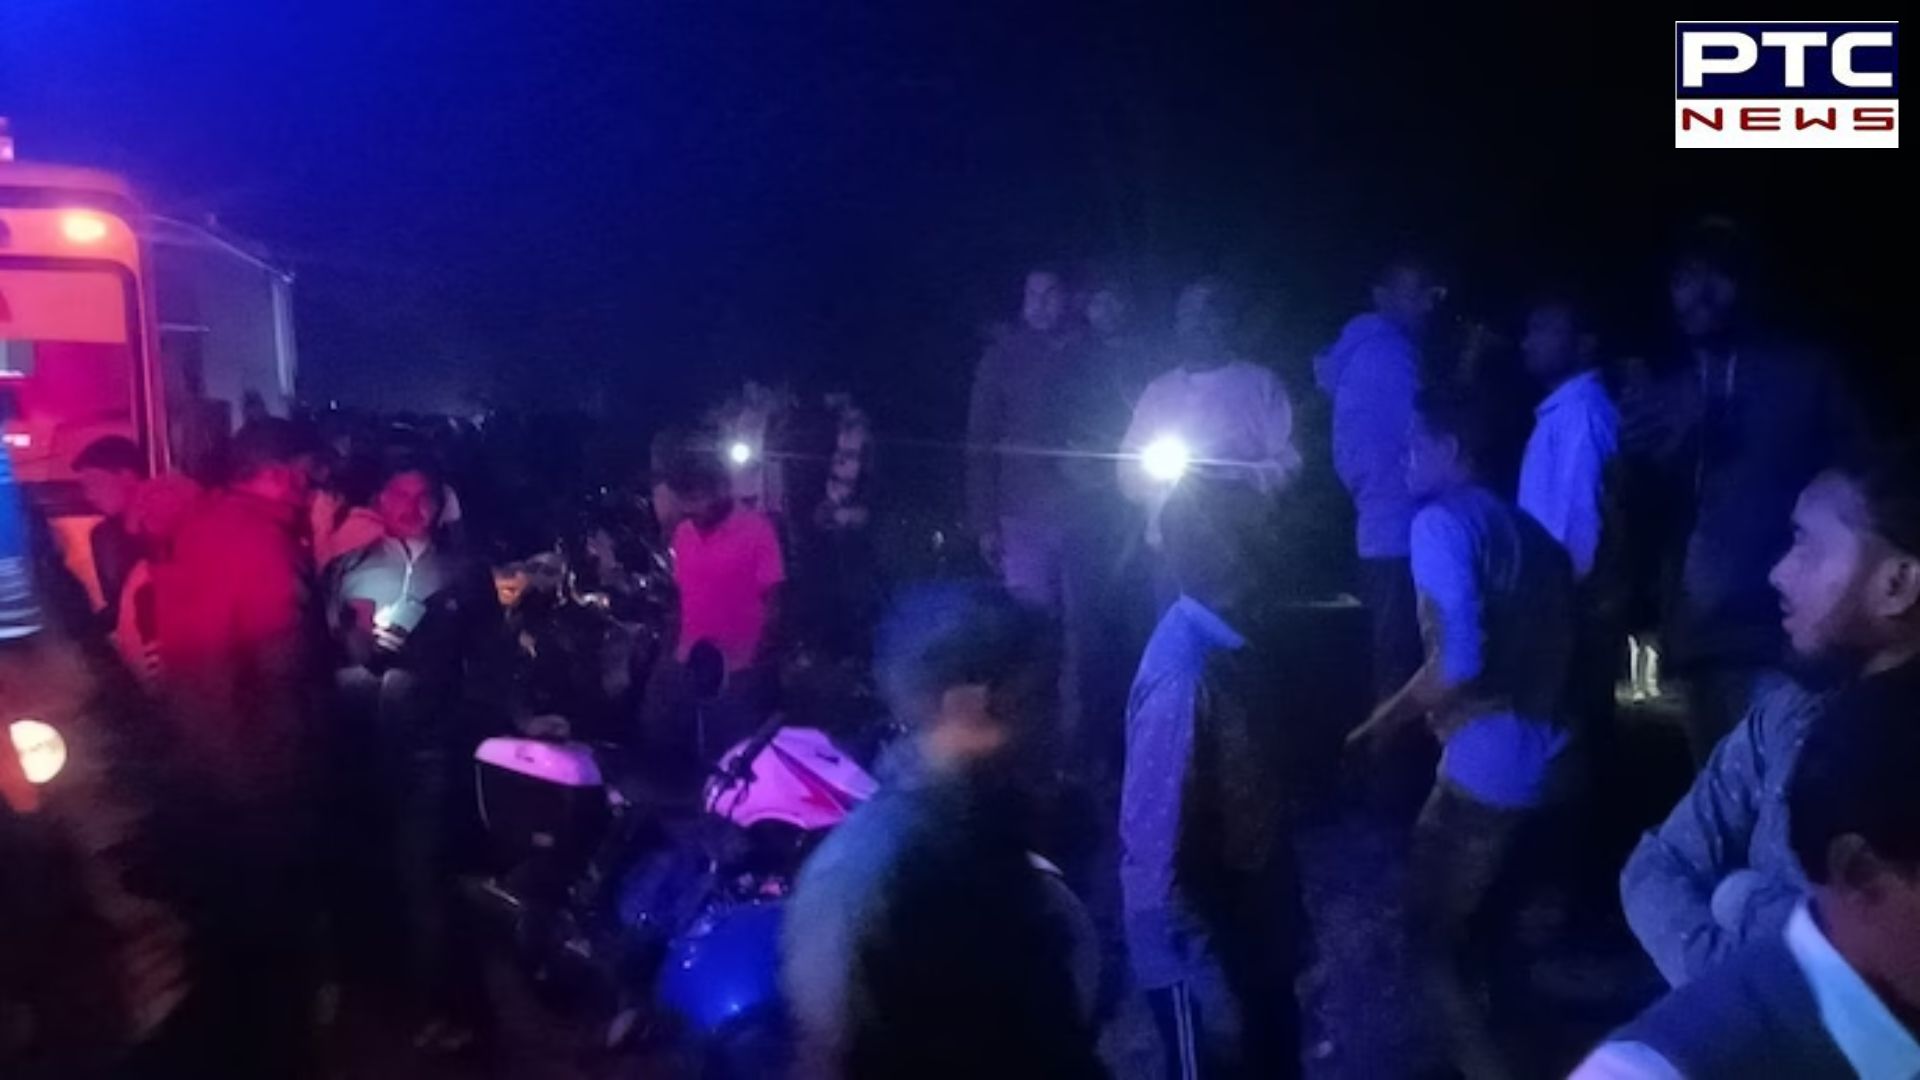 Jharkhand train accident: Two dead, more casualties feared as train collides with passengers